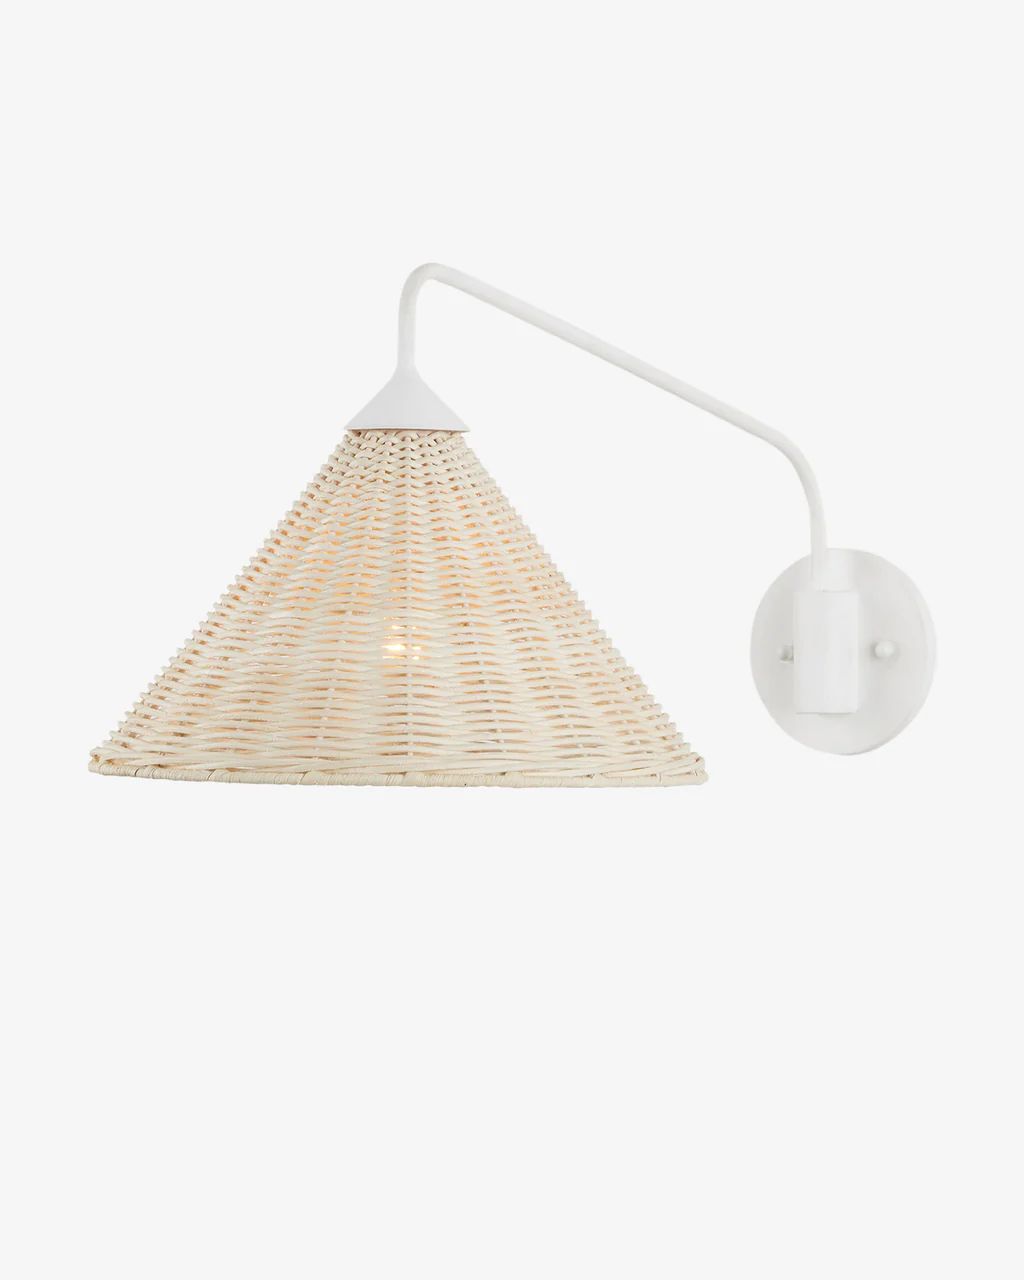 Basket Swing Arm Sconce | McGee & Co.